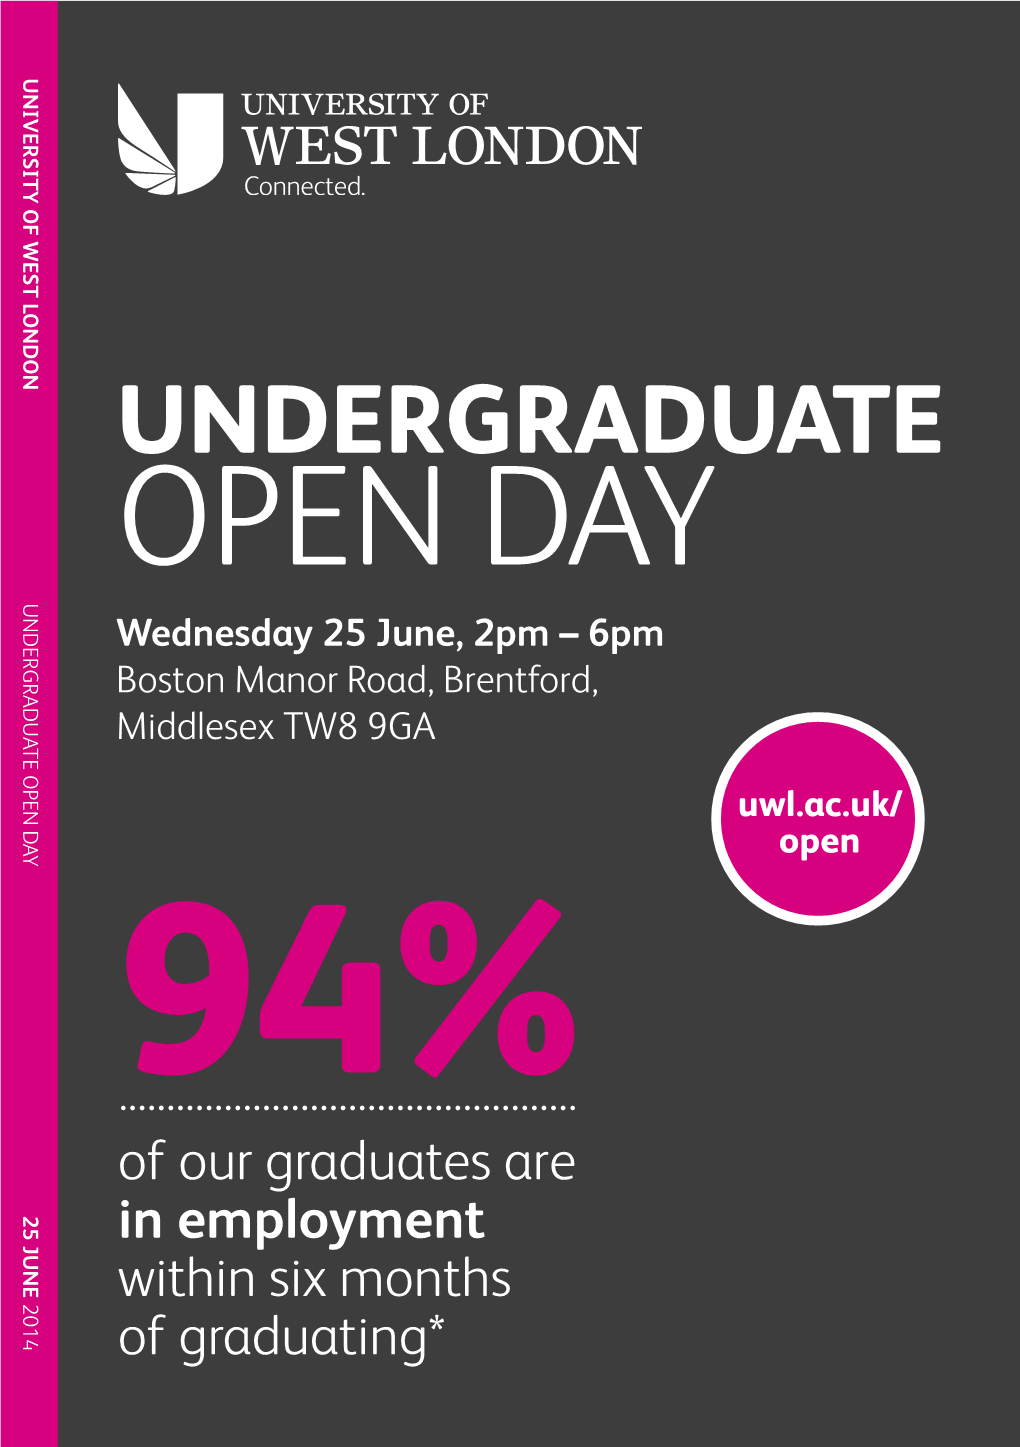 OPEN DAY UNDERGRADUATE OPEN DAY Wednesday 25 June, 2Pm – 6Pm Boston Manor Road, Brentford, Middlesex TW8 9GA